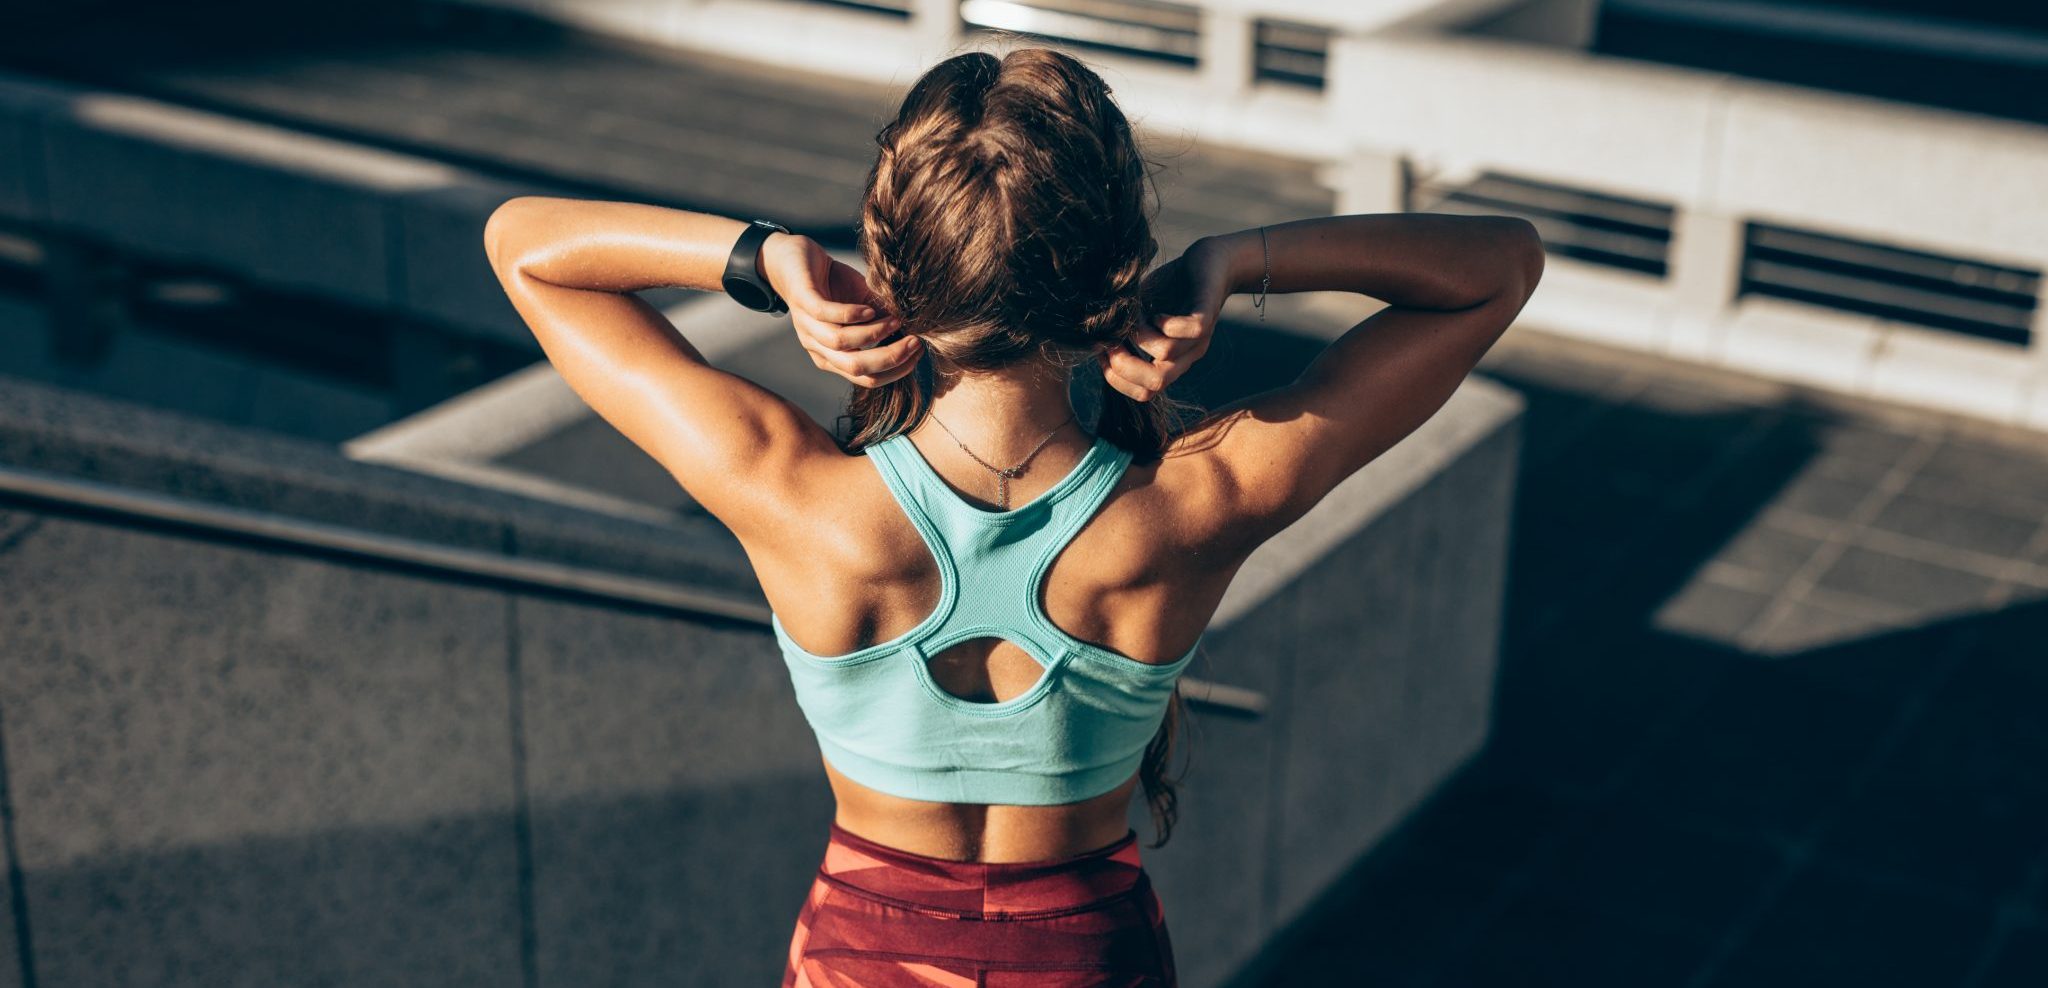 9 Top Workout Hairstyles to Suit Your Style